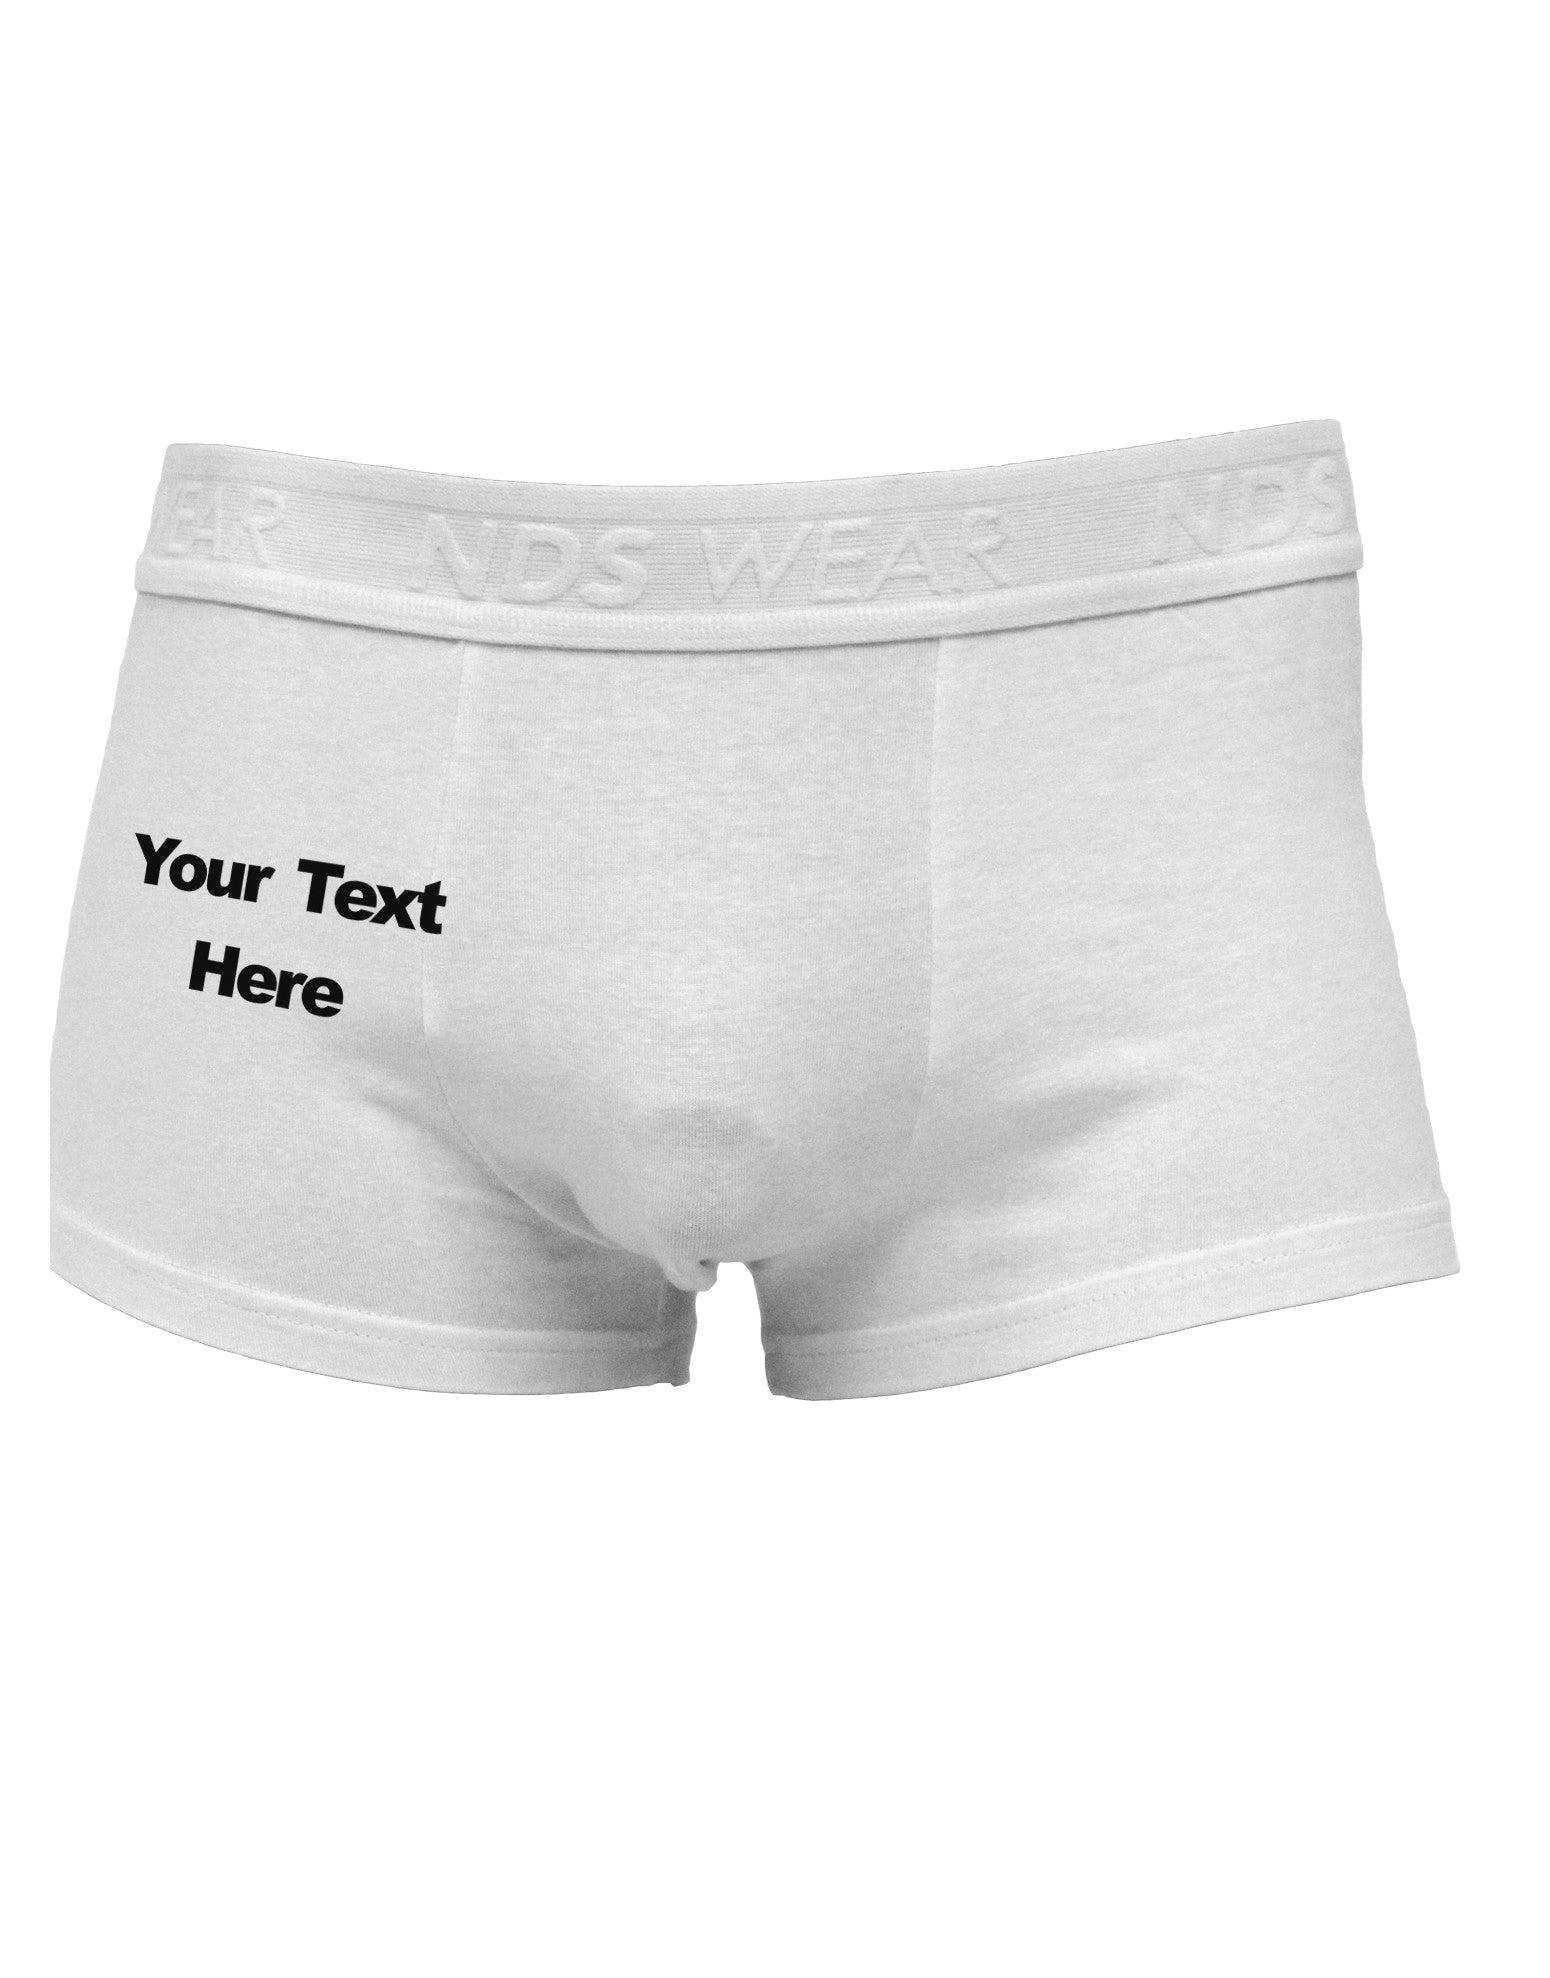 Enter Your Own Words Customized Text Side Printed Mens Trunk Underwear -  Davson Sales